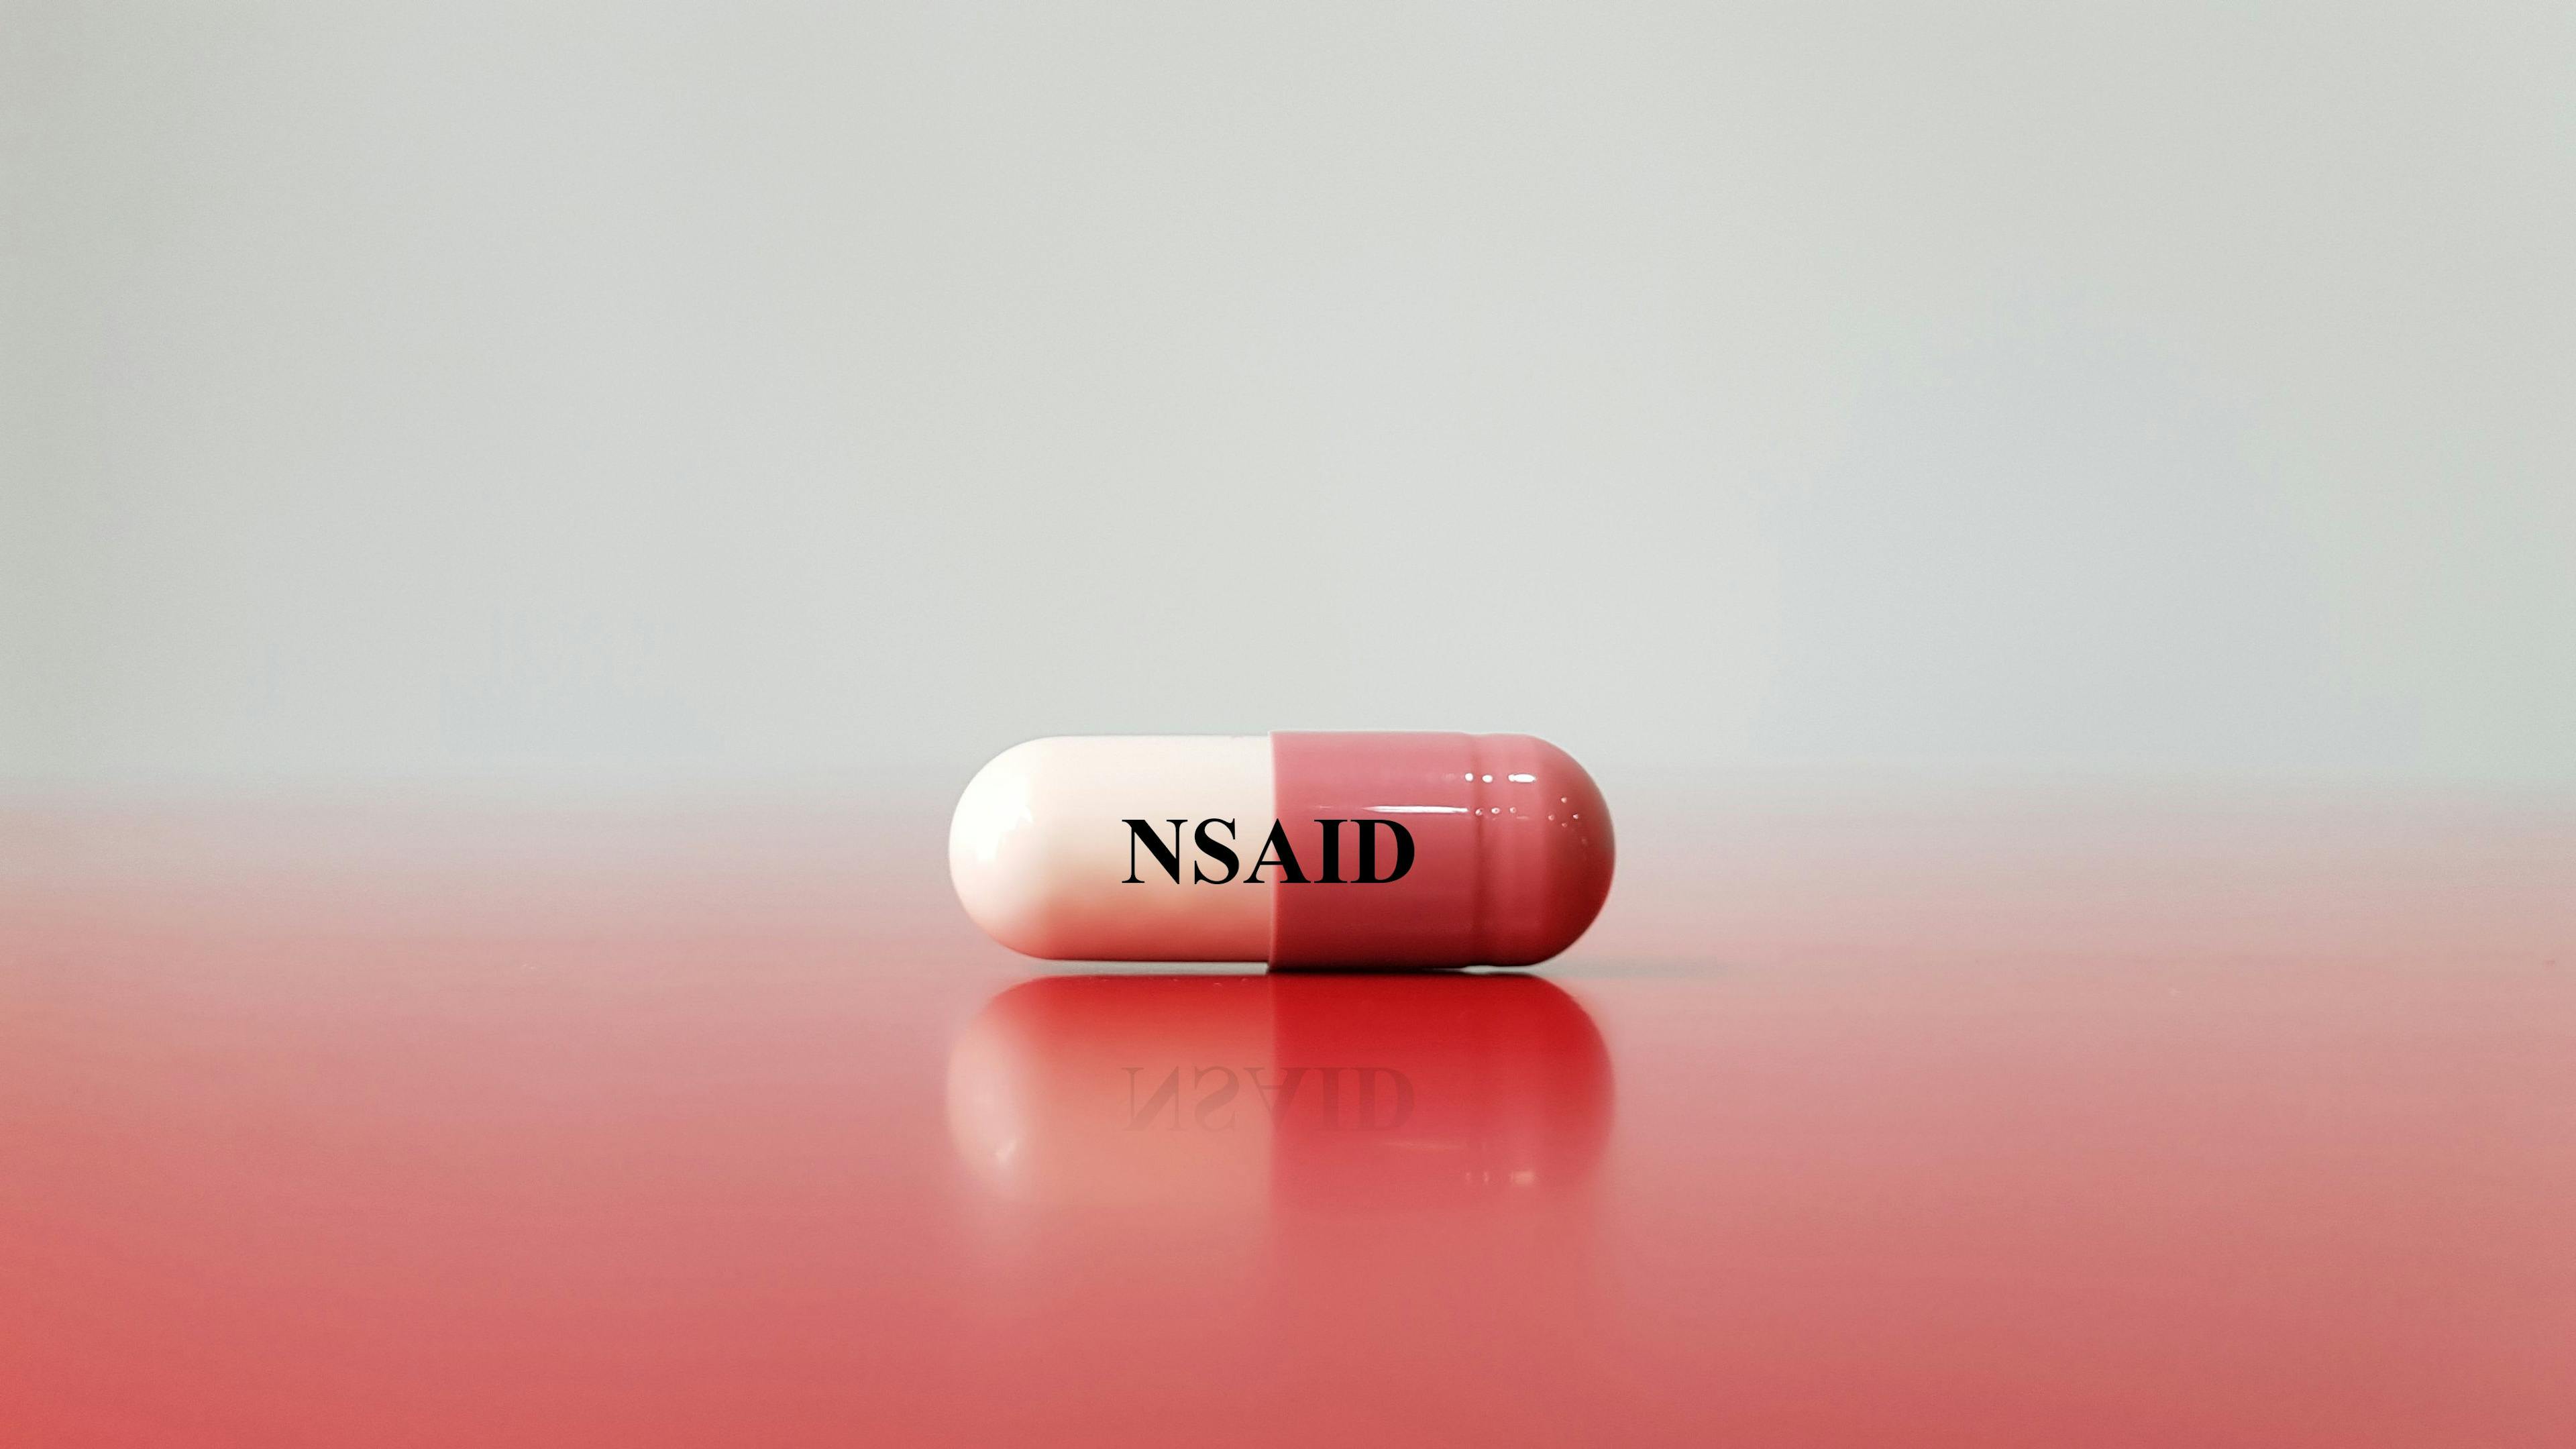 Capsule of NSAID drug on white background(Nonsteroidal anti-inflammatory drug). This medication used for pain control, decrease inflammation, fever treatment, prevent blood clot. Medical concept  | Image credit: Joel bubble ben - stock.adobe.com